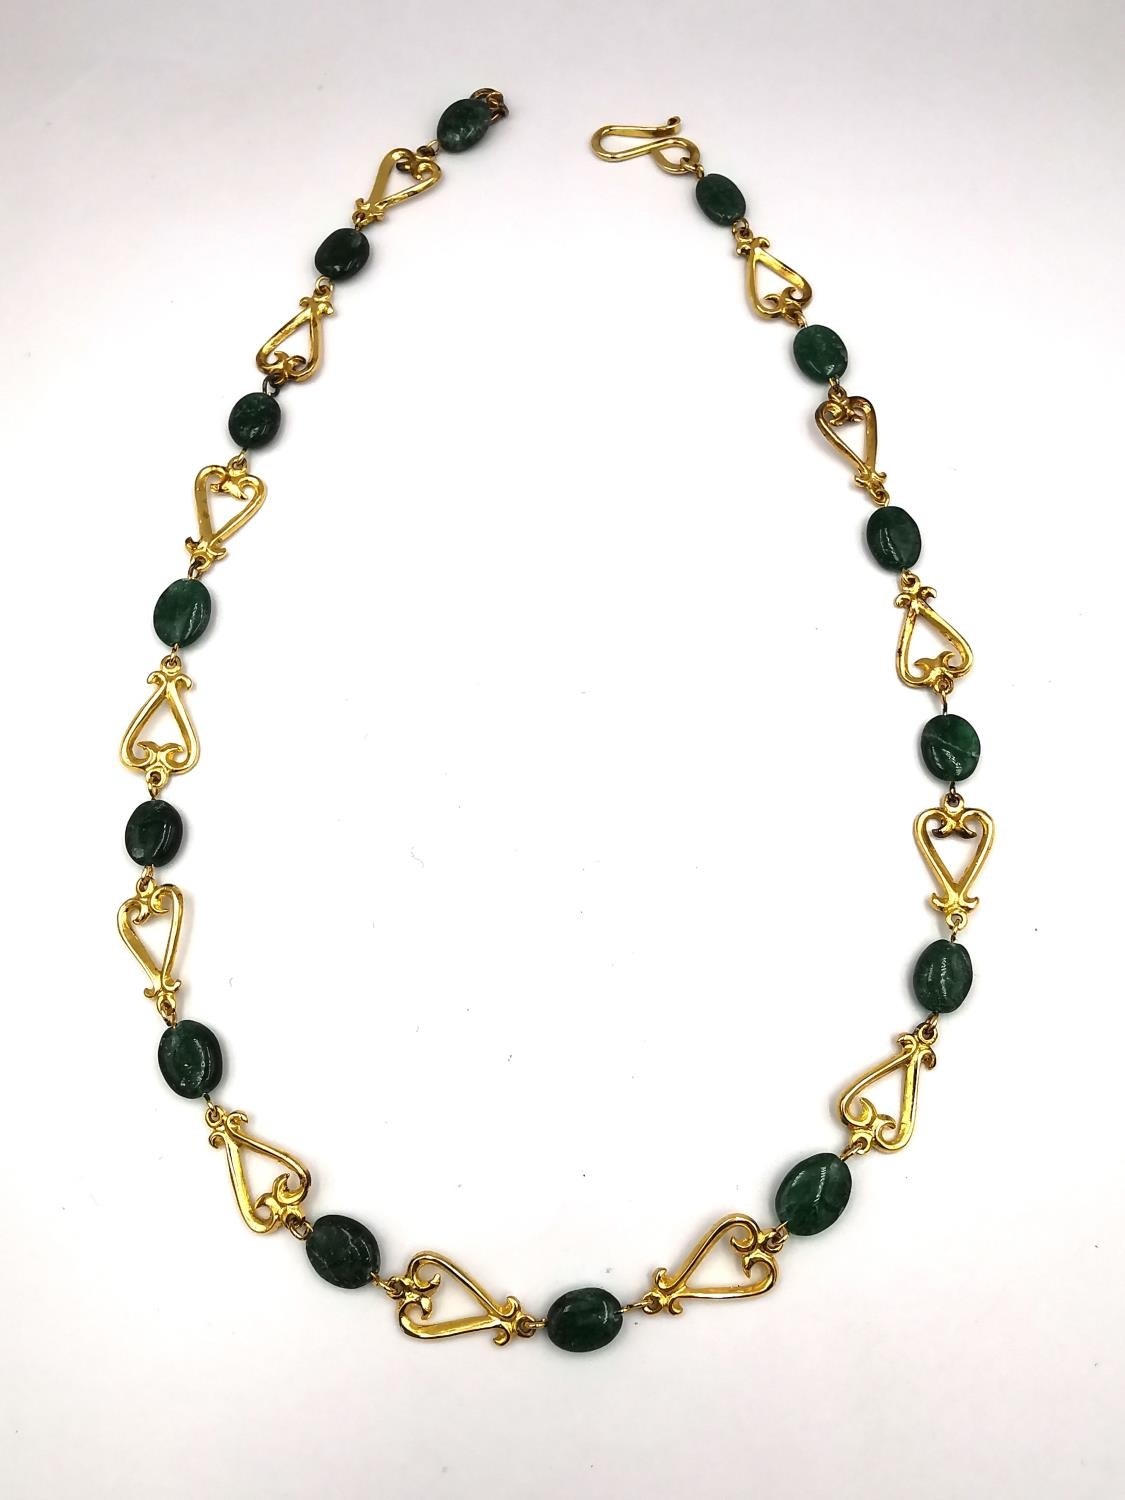 A boxed Past Times necklace based on a Roman Lyre necklace from 2nd century AD, gold plated on - Image 6 of 7